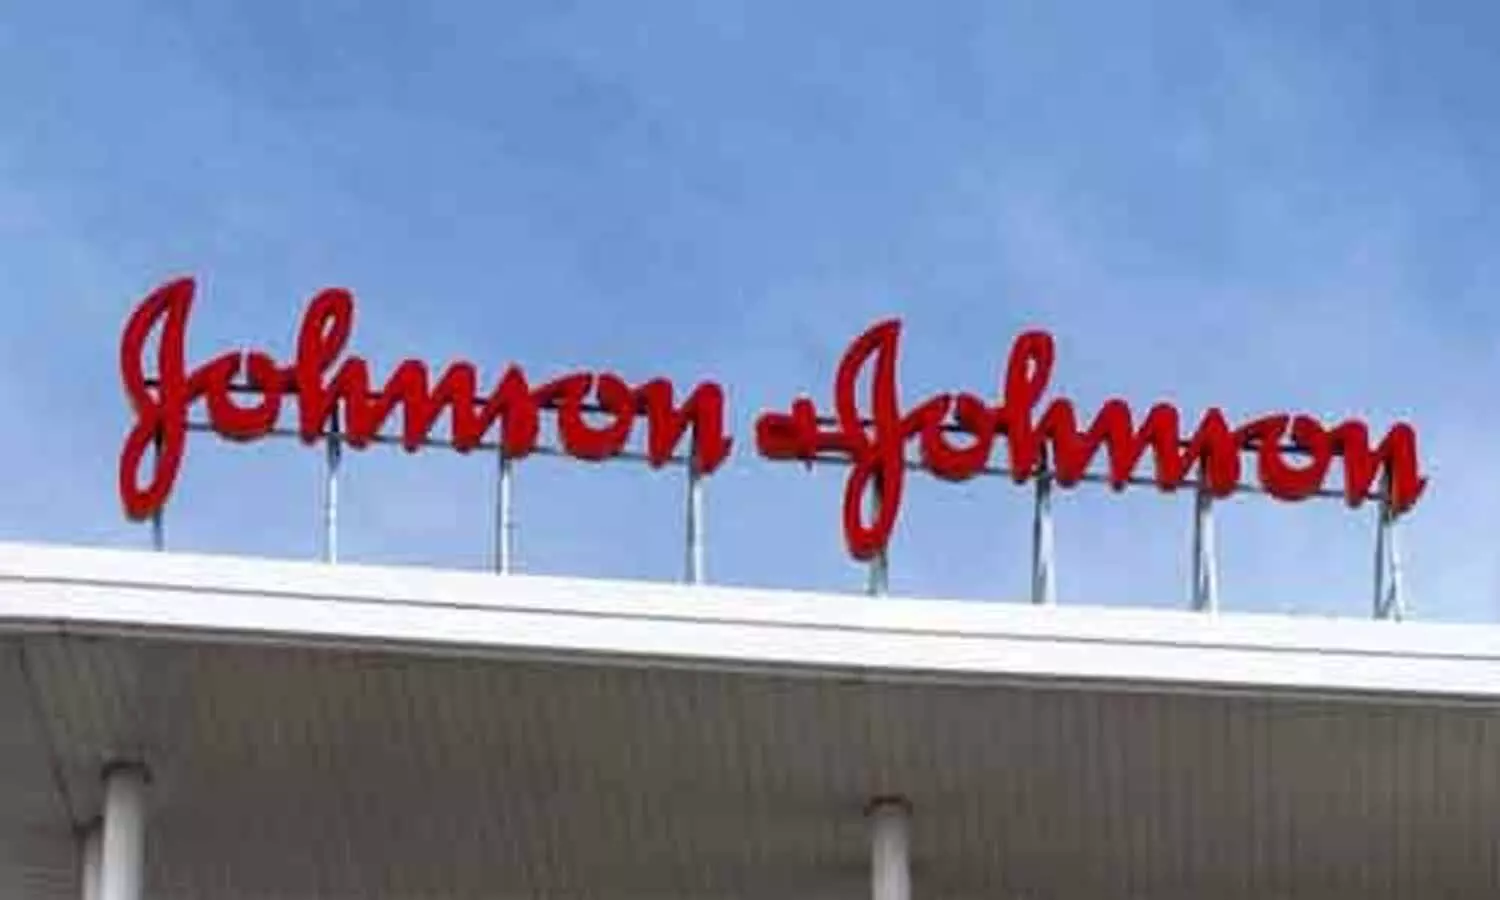 Medical devices, prescription drugs boost JnJ earning in Q4